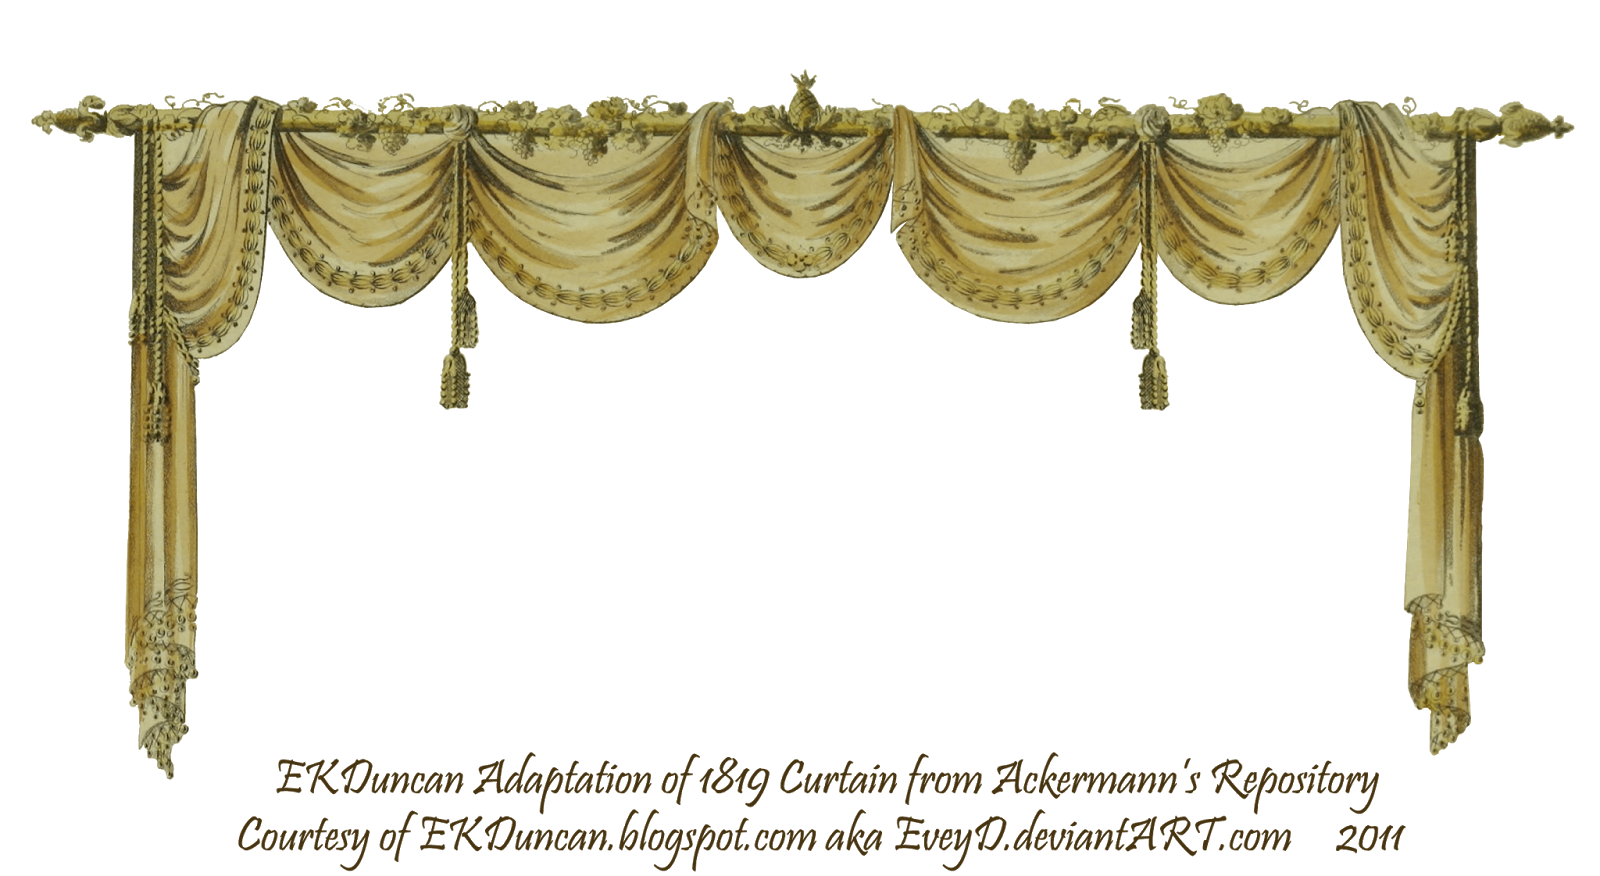 curtain clipart page border